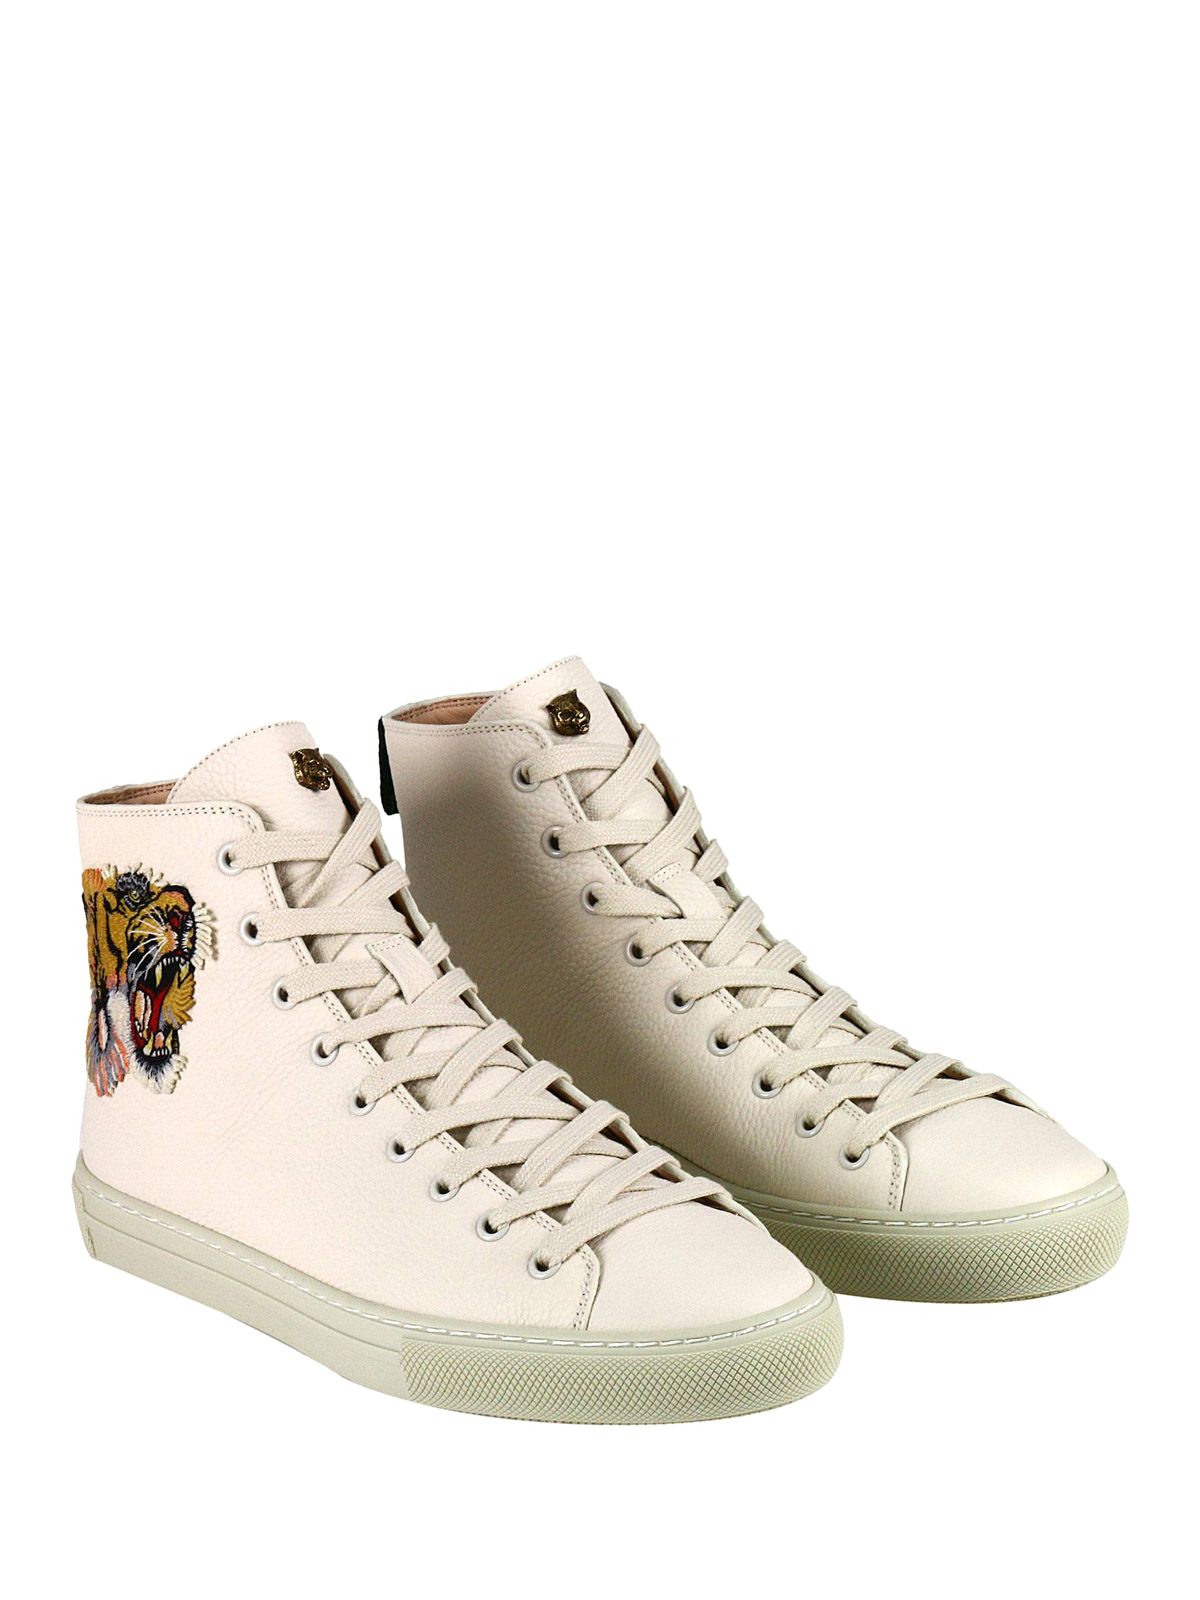 Gucci - Tiger embroidered high top 